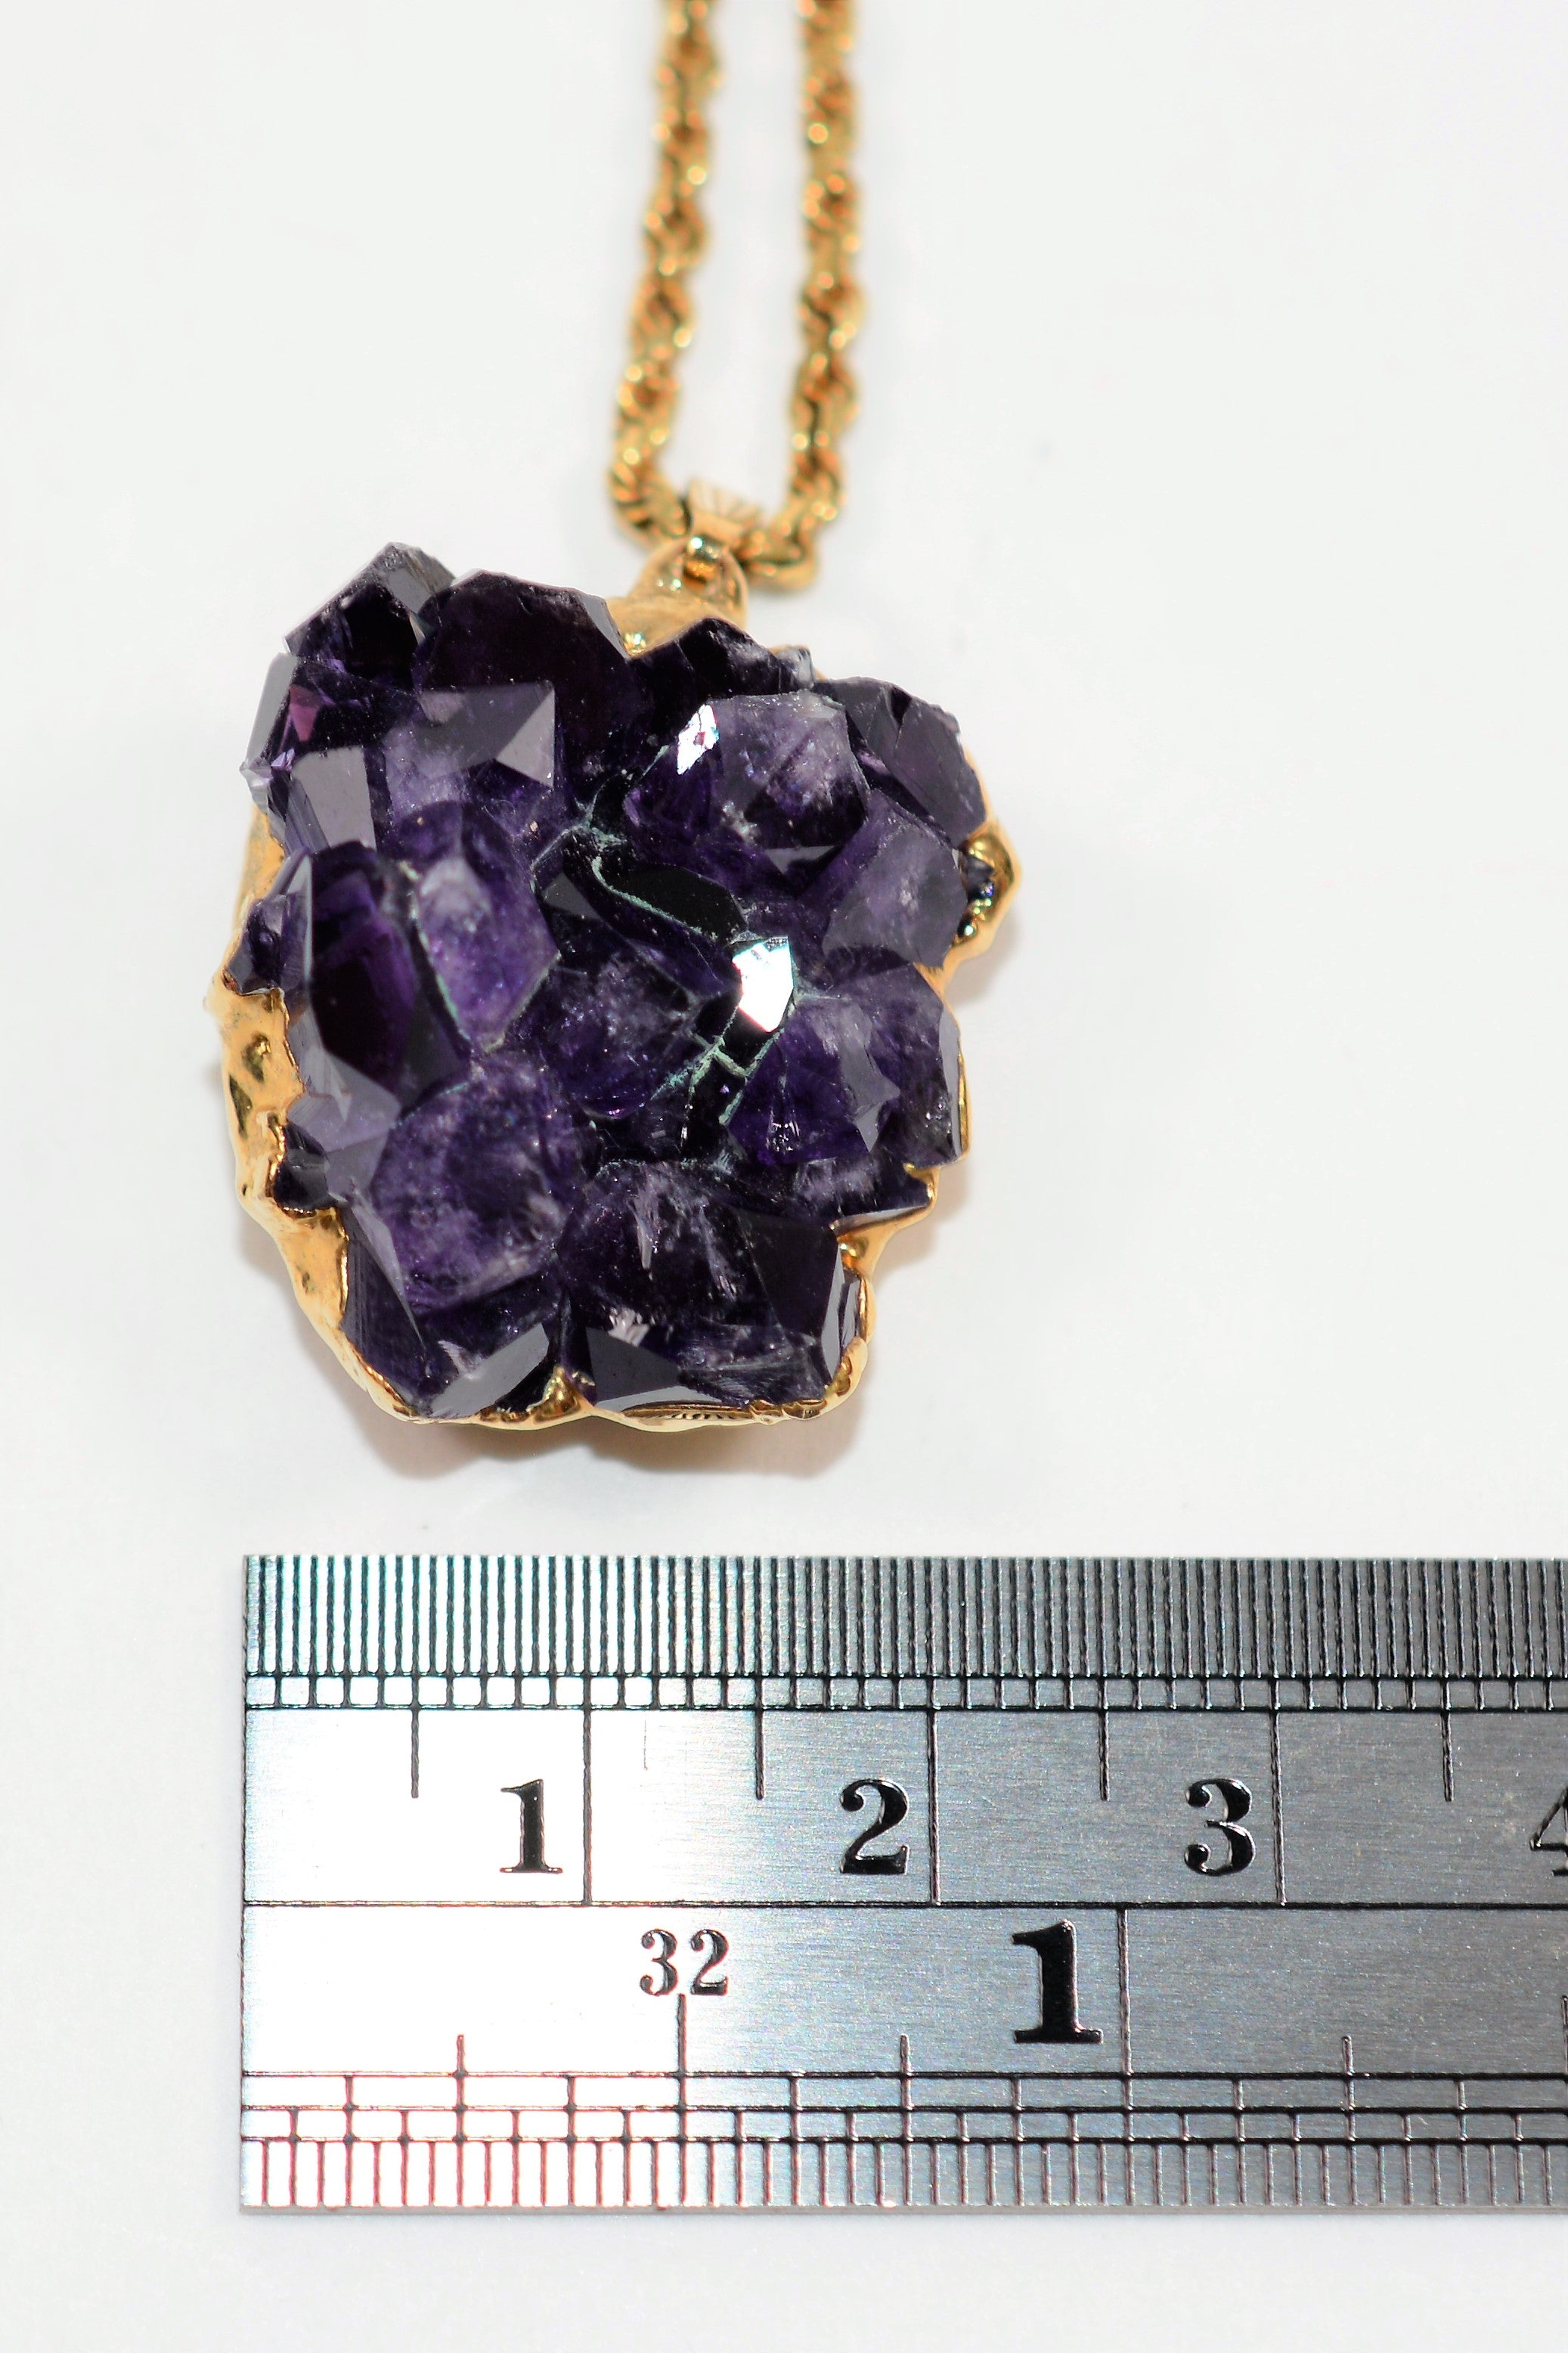 Natural Amethyst Crystal Necklace 14K Solid Gold Pendant Necklace Amethyst Necklace Gemstone Necklace Statement Necklace Estate Jewelry